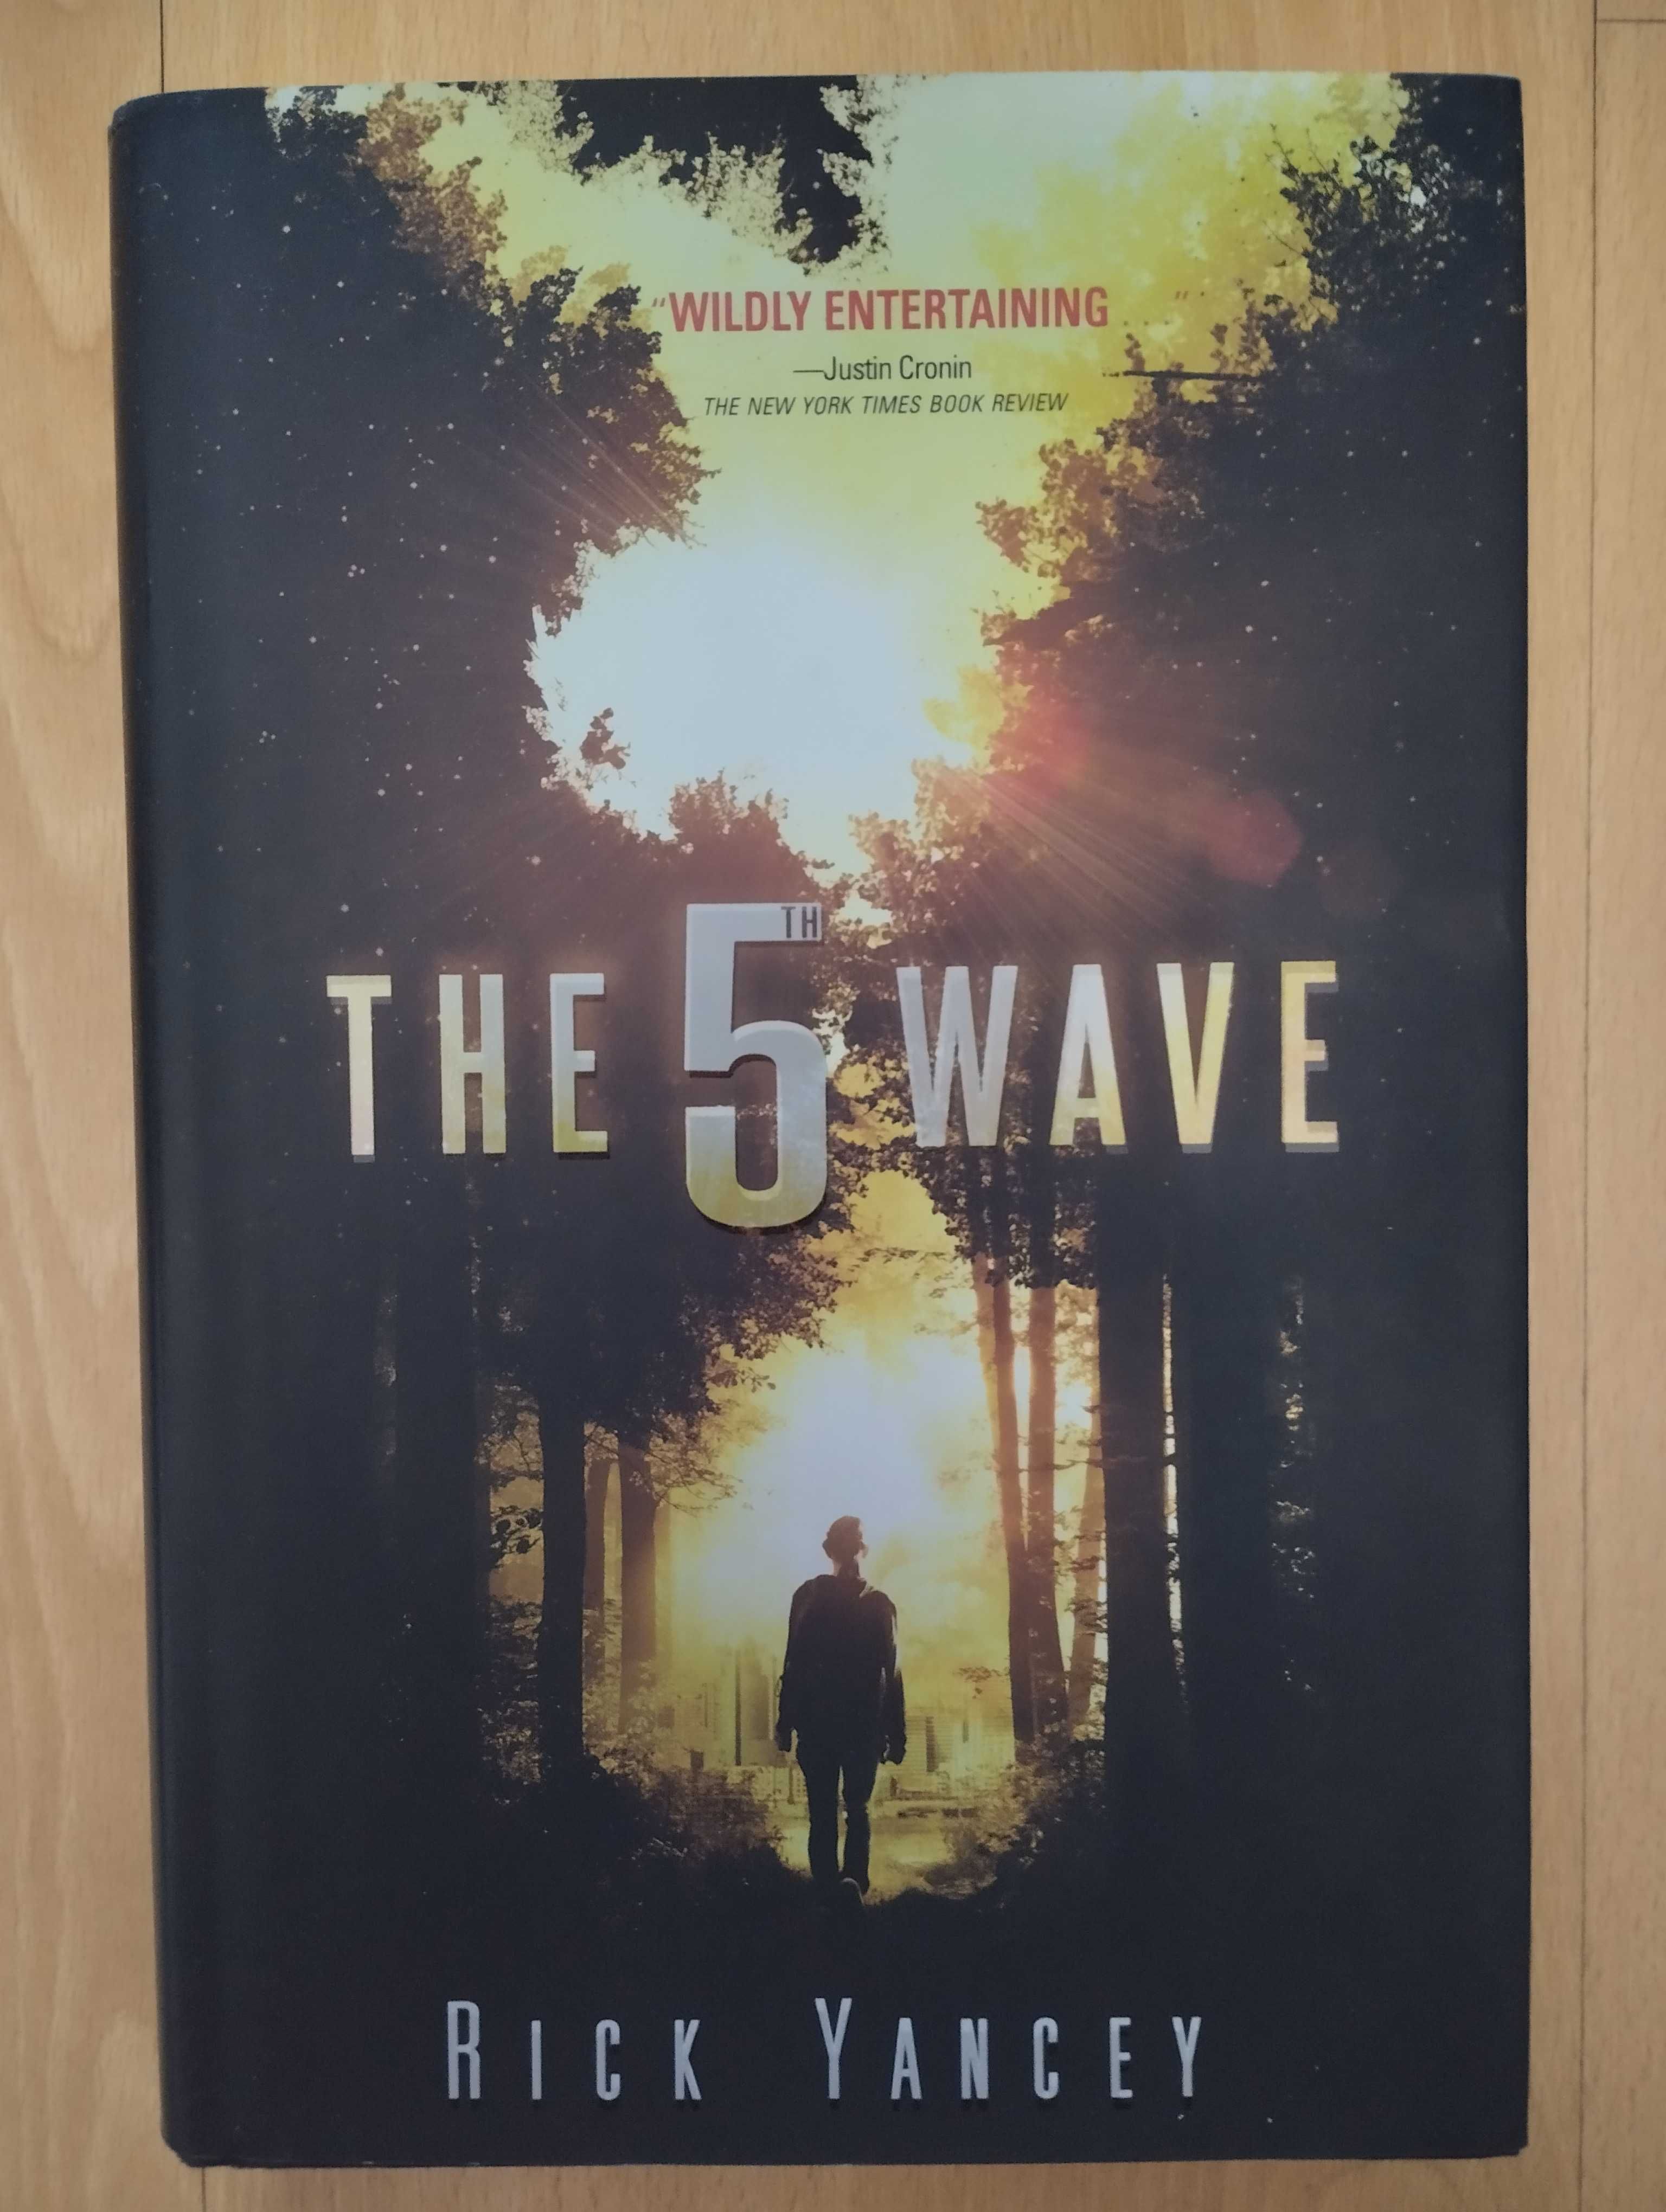 "The 5th Wave" by Rick Yancey - Hardcover